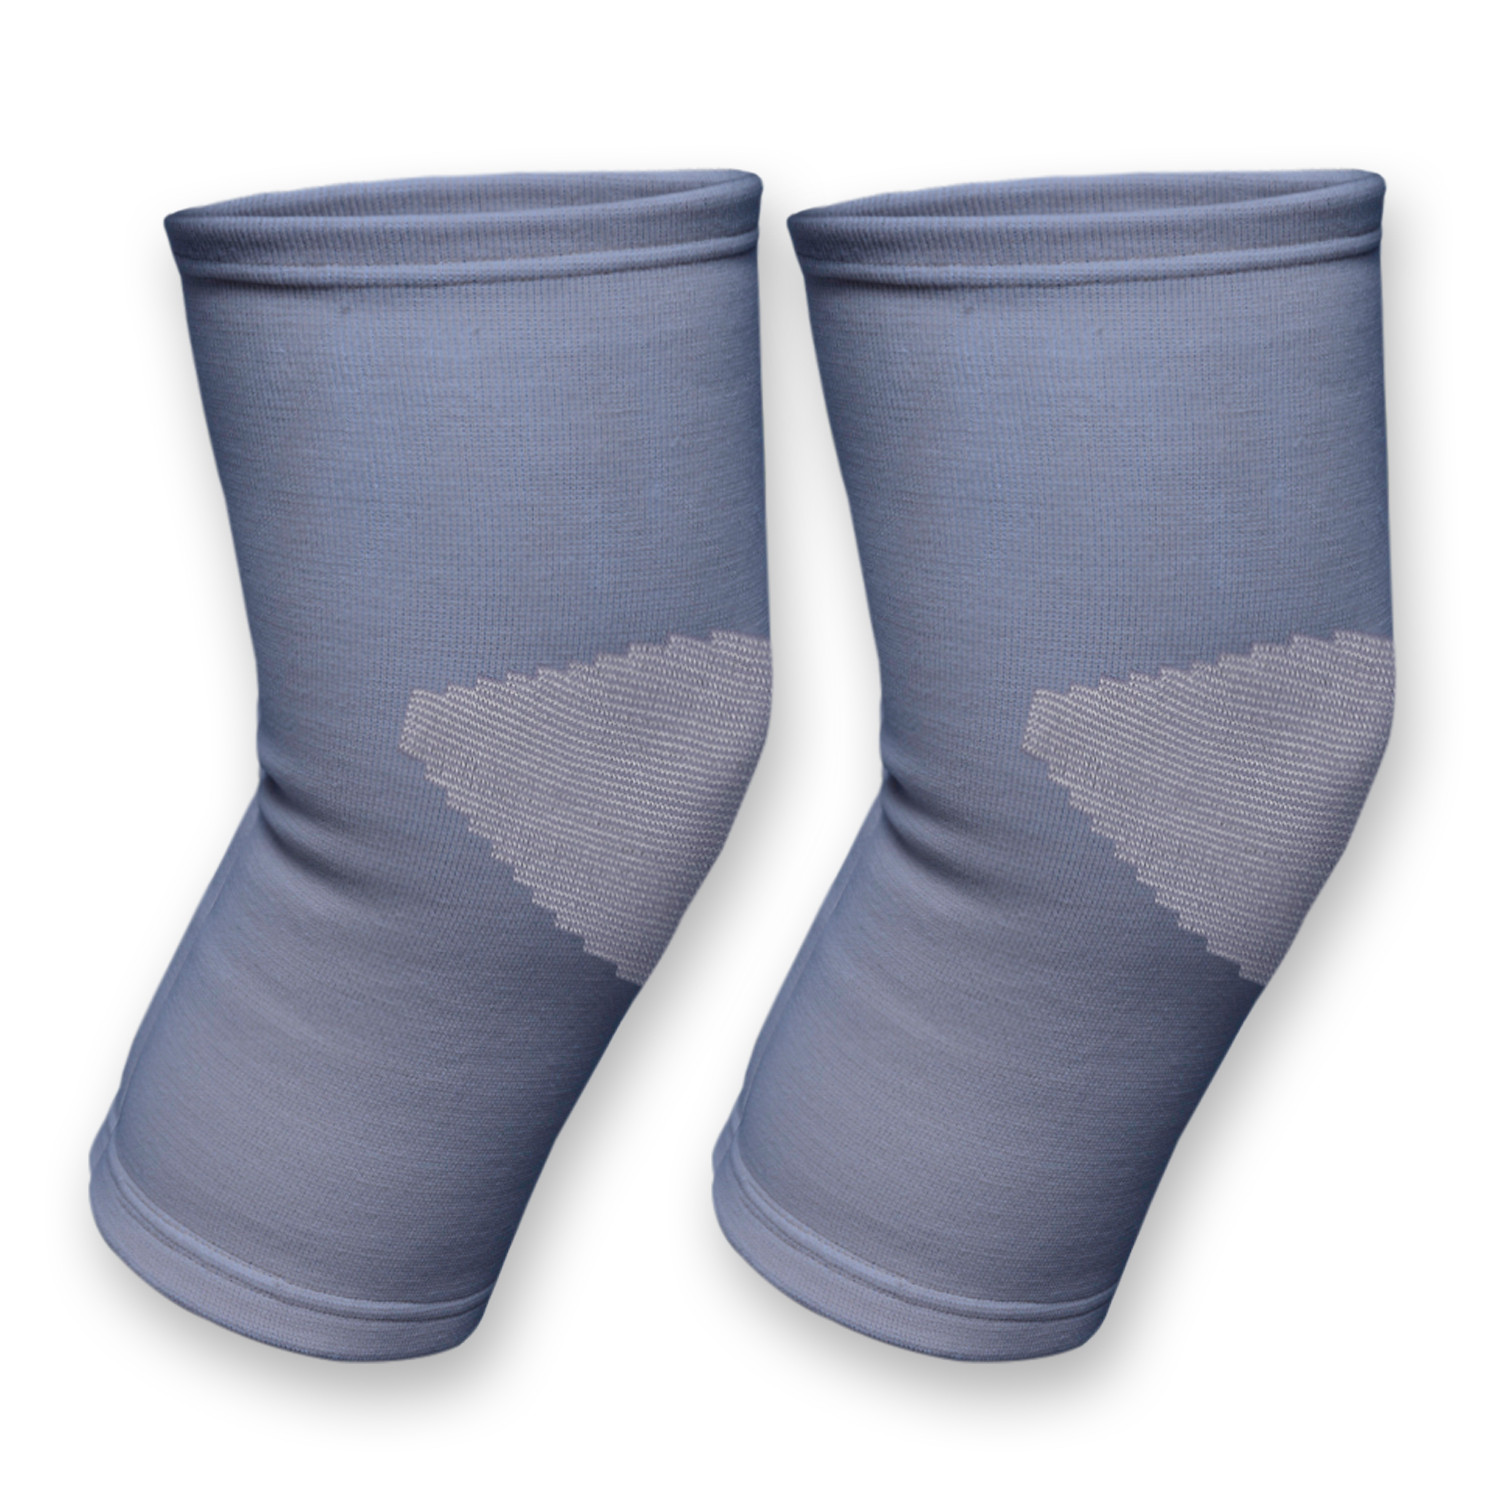 Kuber Industries 3D Knee Cap | Cotton Knee Sleeves |Sleeves For Joint Pain | Sleeves For Arthritis Relief | Unisex Knee Wraps | Knee Bands |Size-XL | 1 Pair | Gray & White